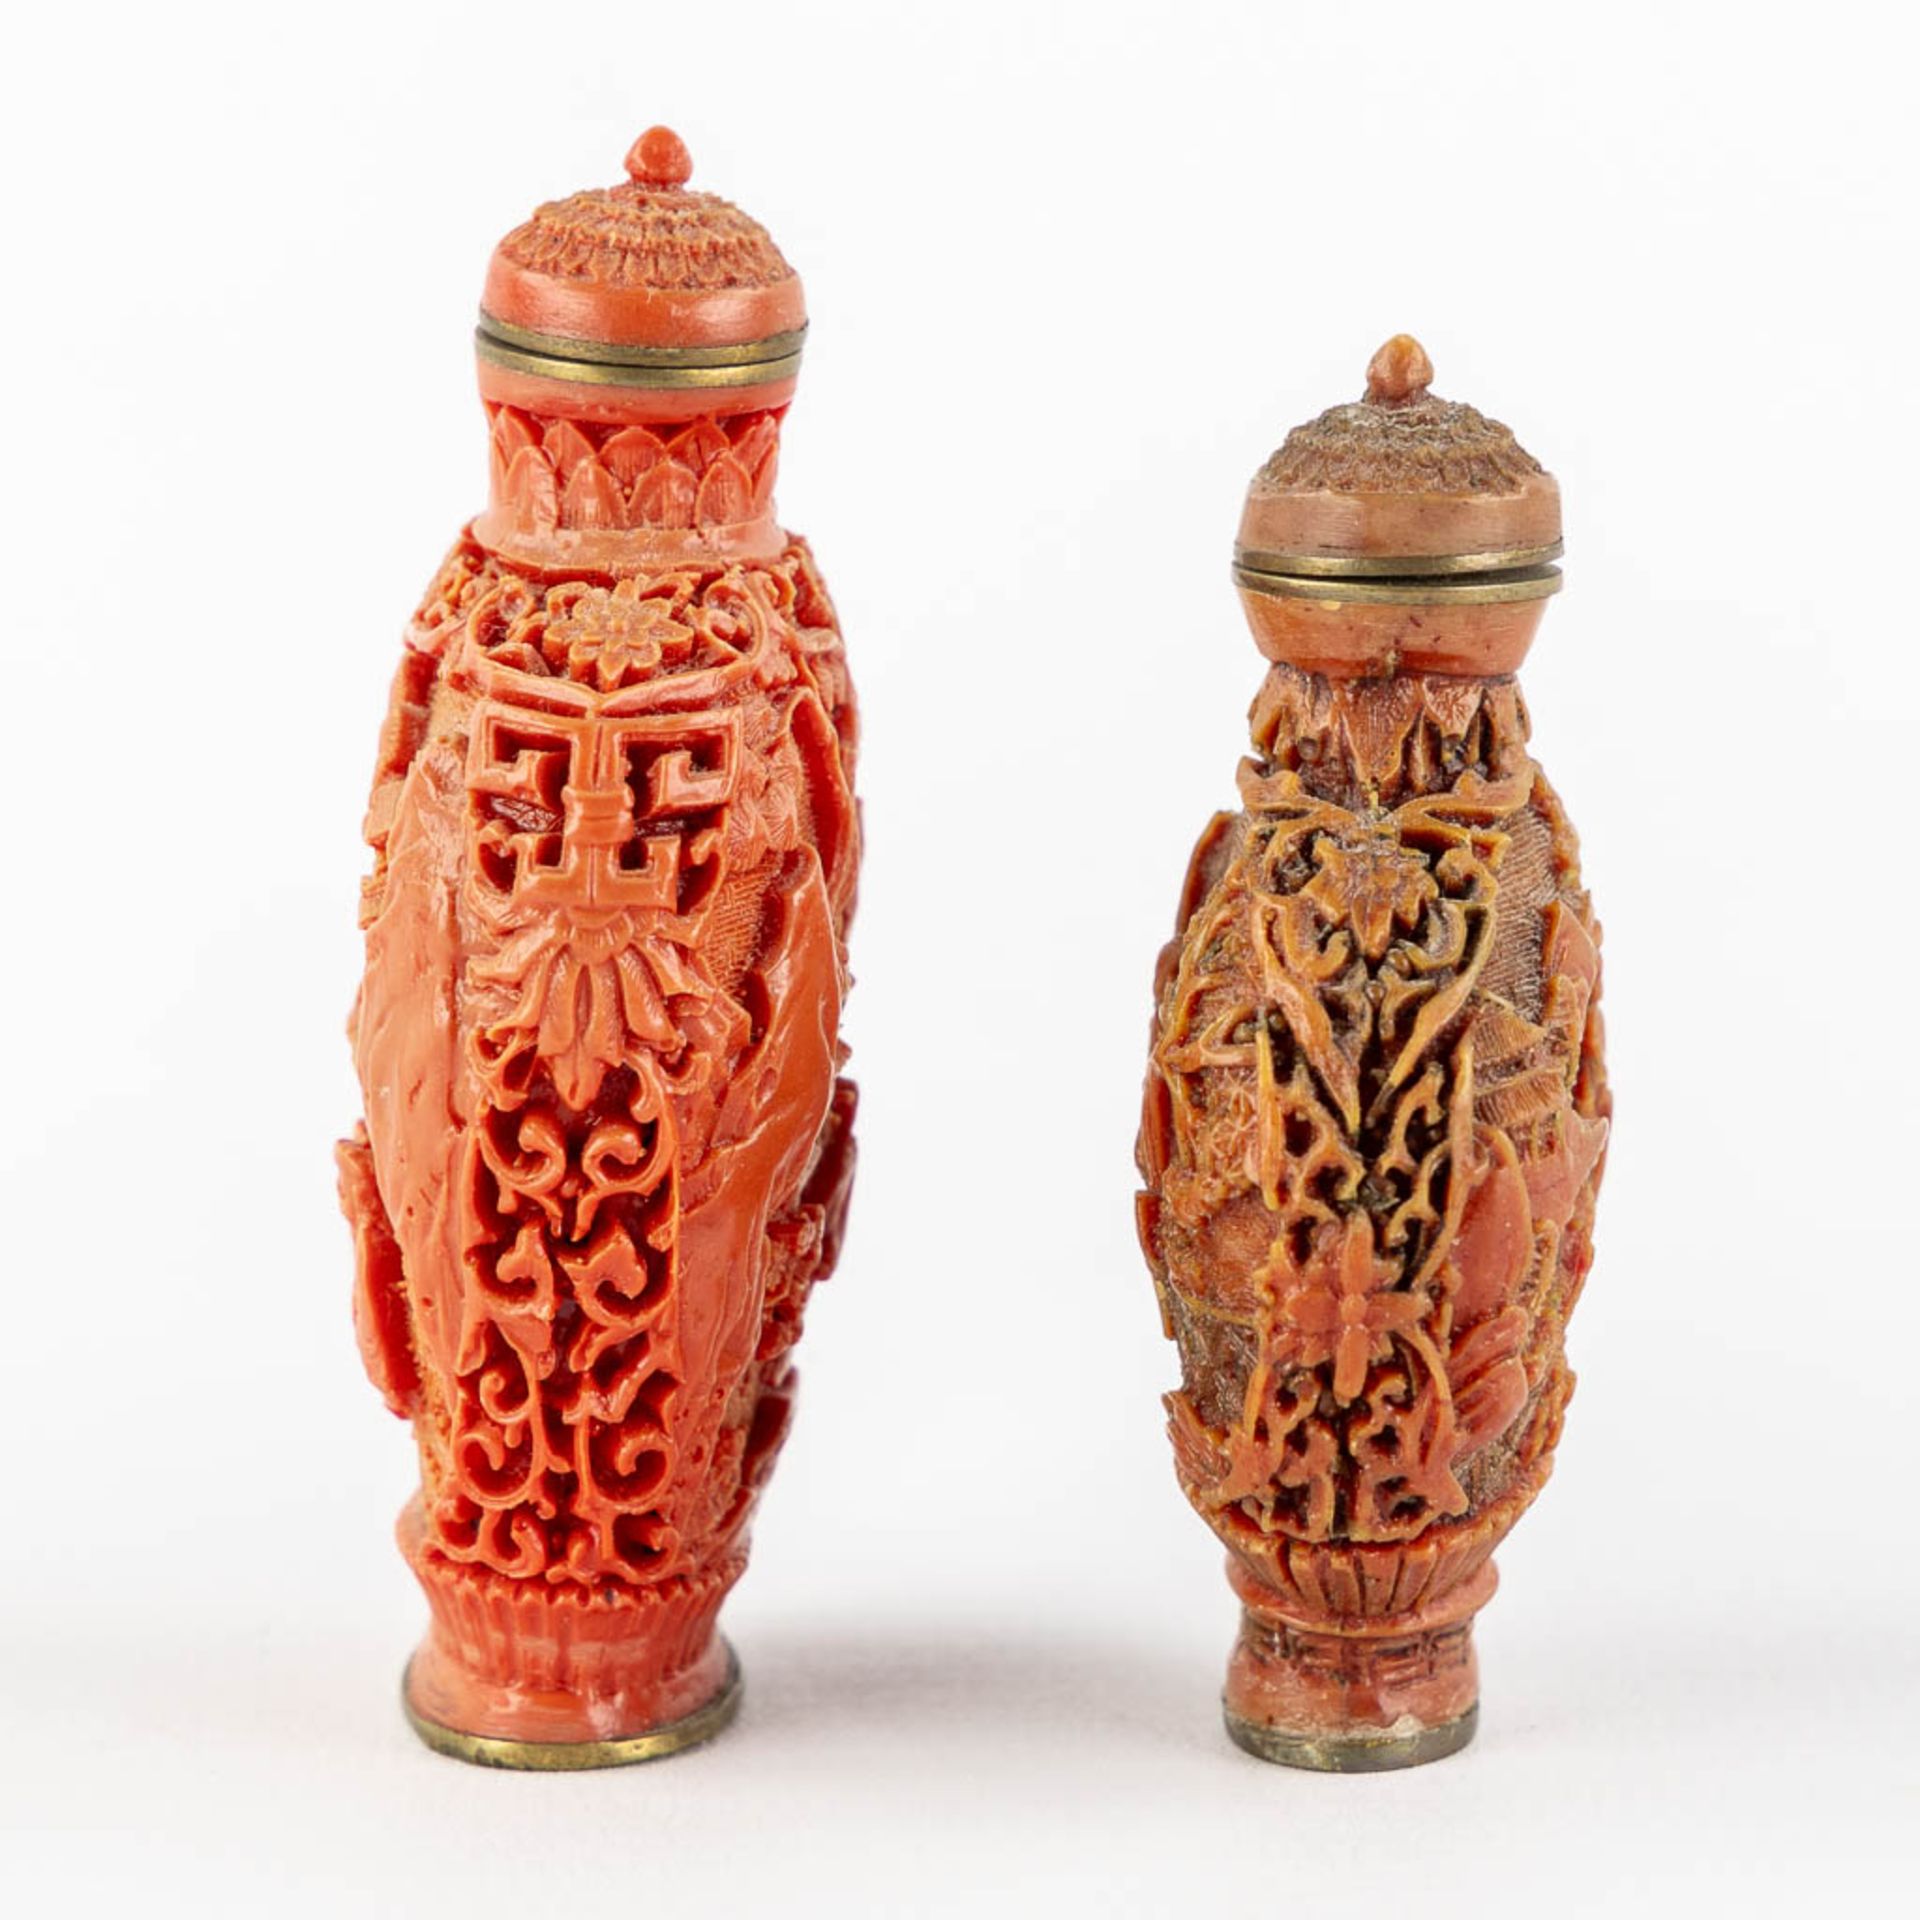 Two Snuff boxes, China, sculptured coral. Late Qing Dynasty. (H:7,2 cm) - Bild 6 aus 9